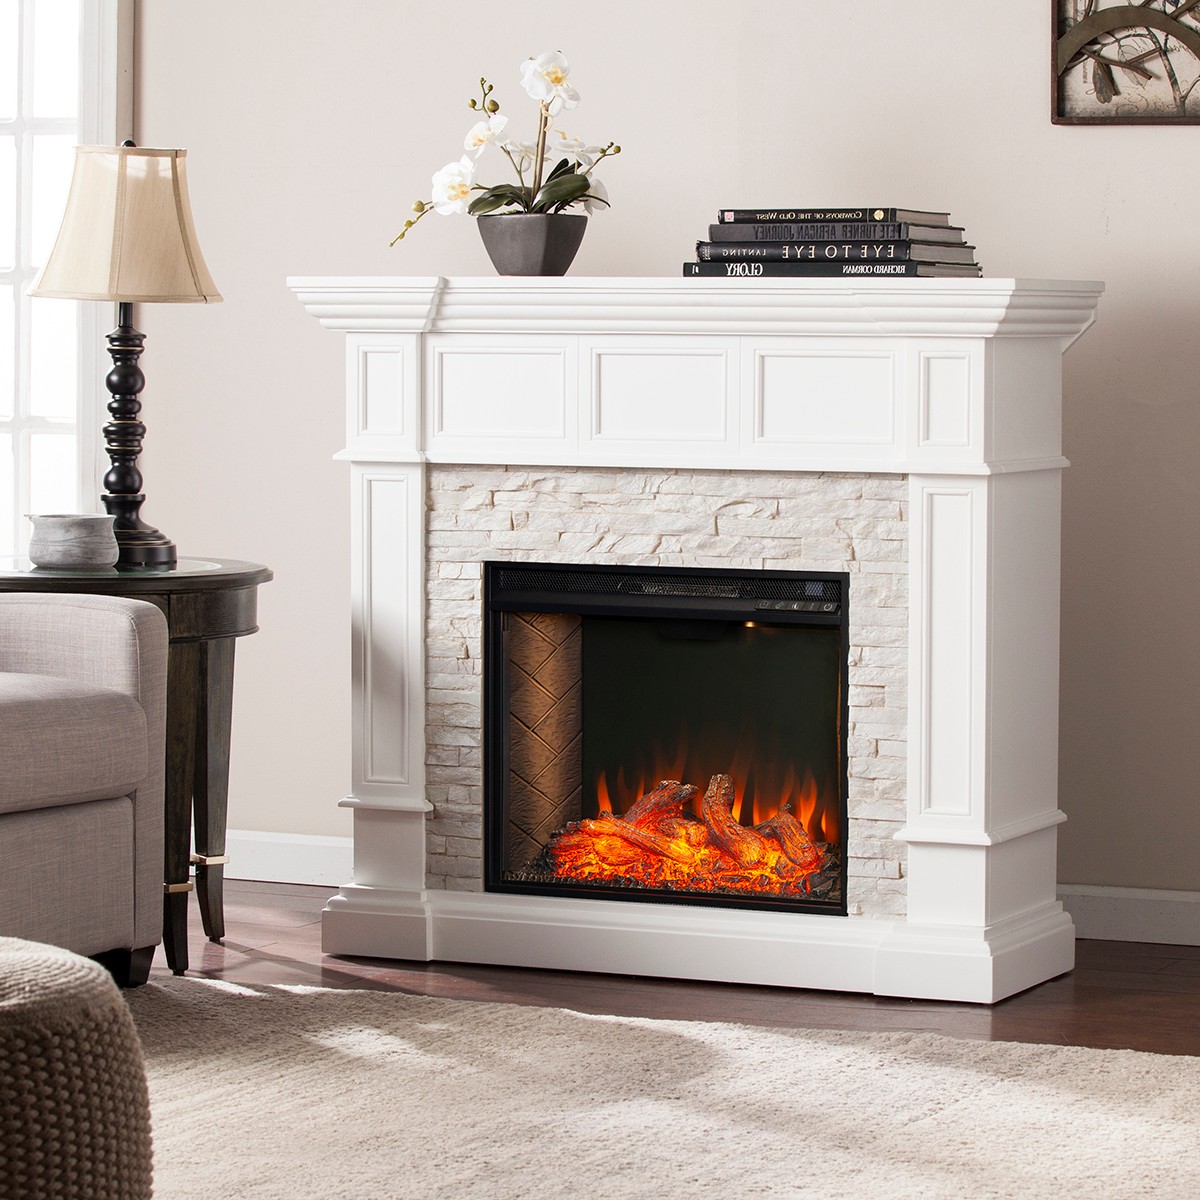 Standard Fireplace Mantel Height Awesome southern Enterprises Merrimack Simulated Stone Convertible Electric Fireplace